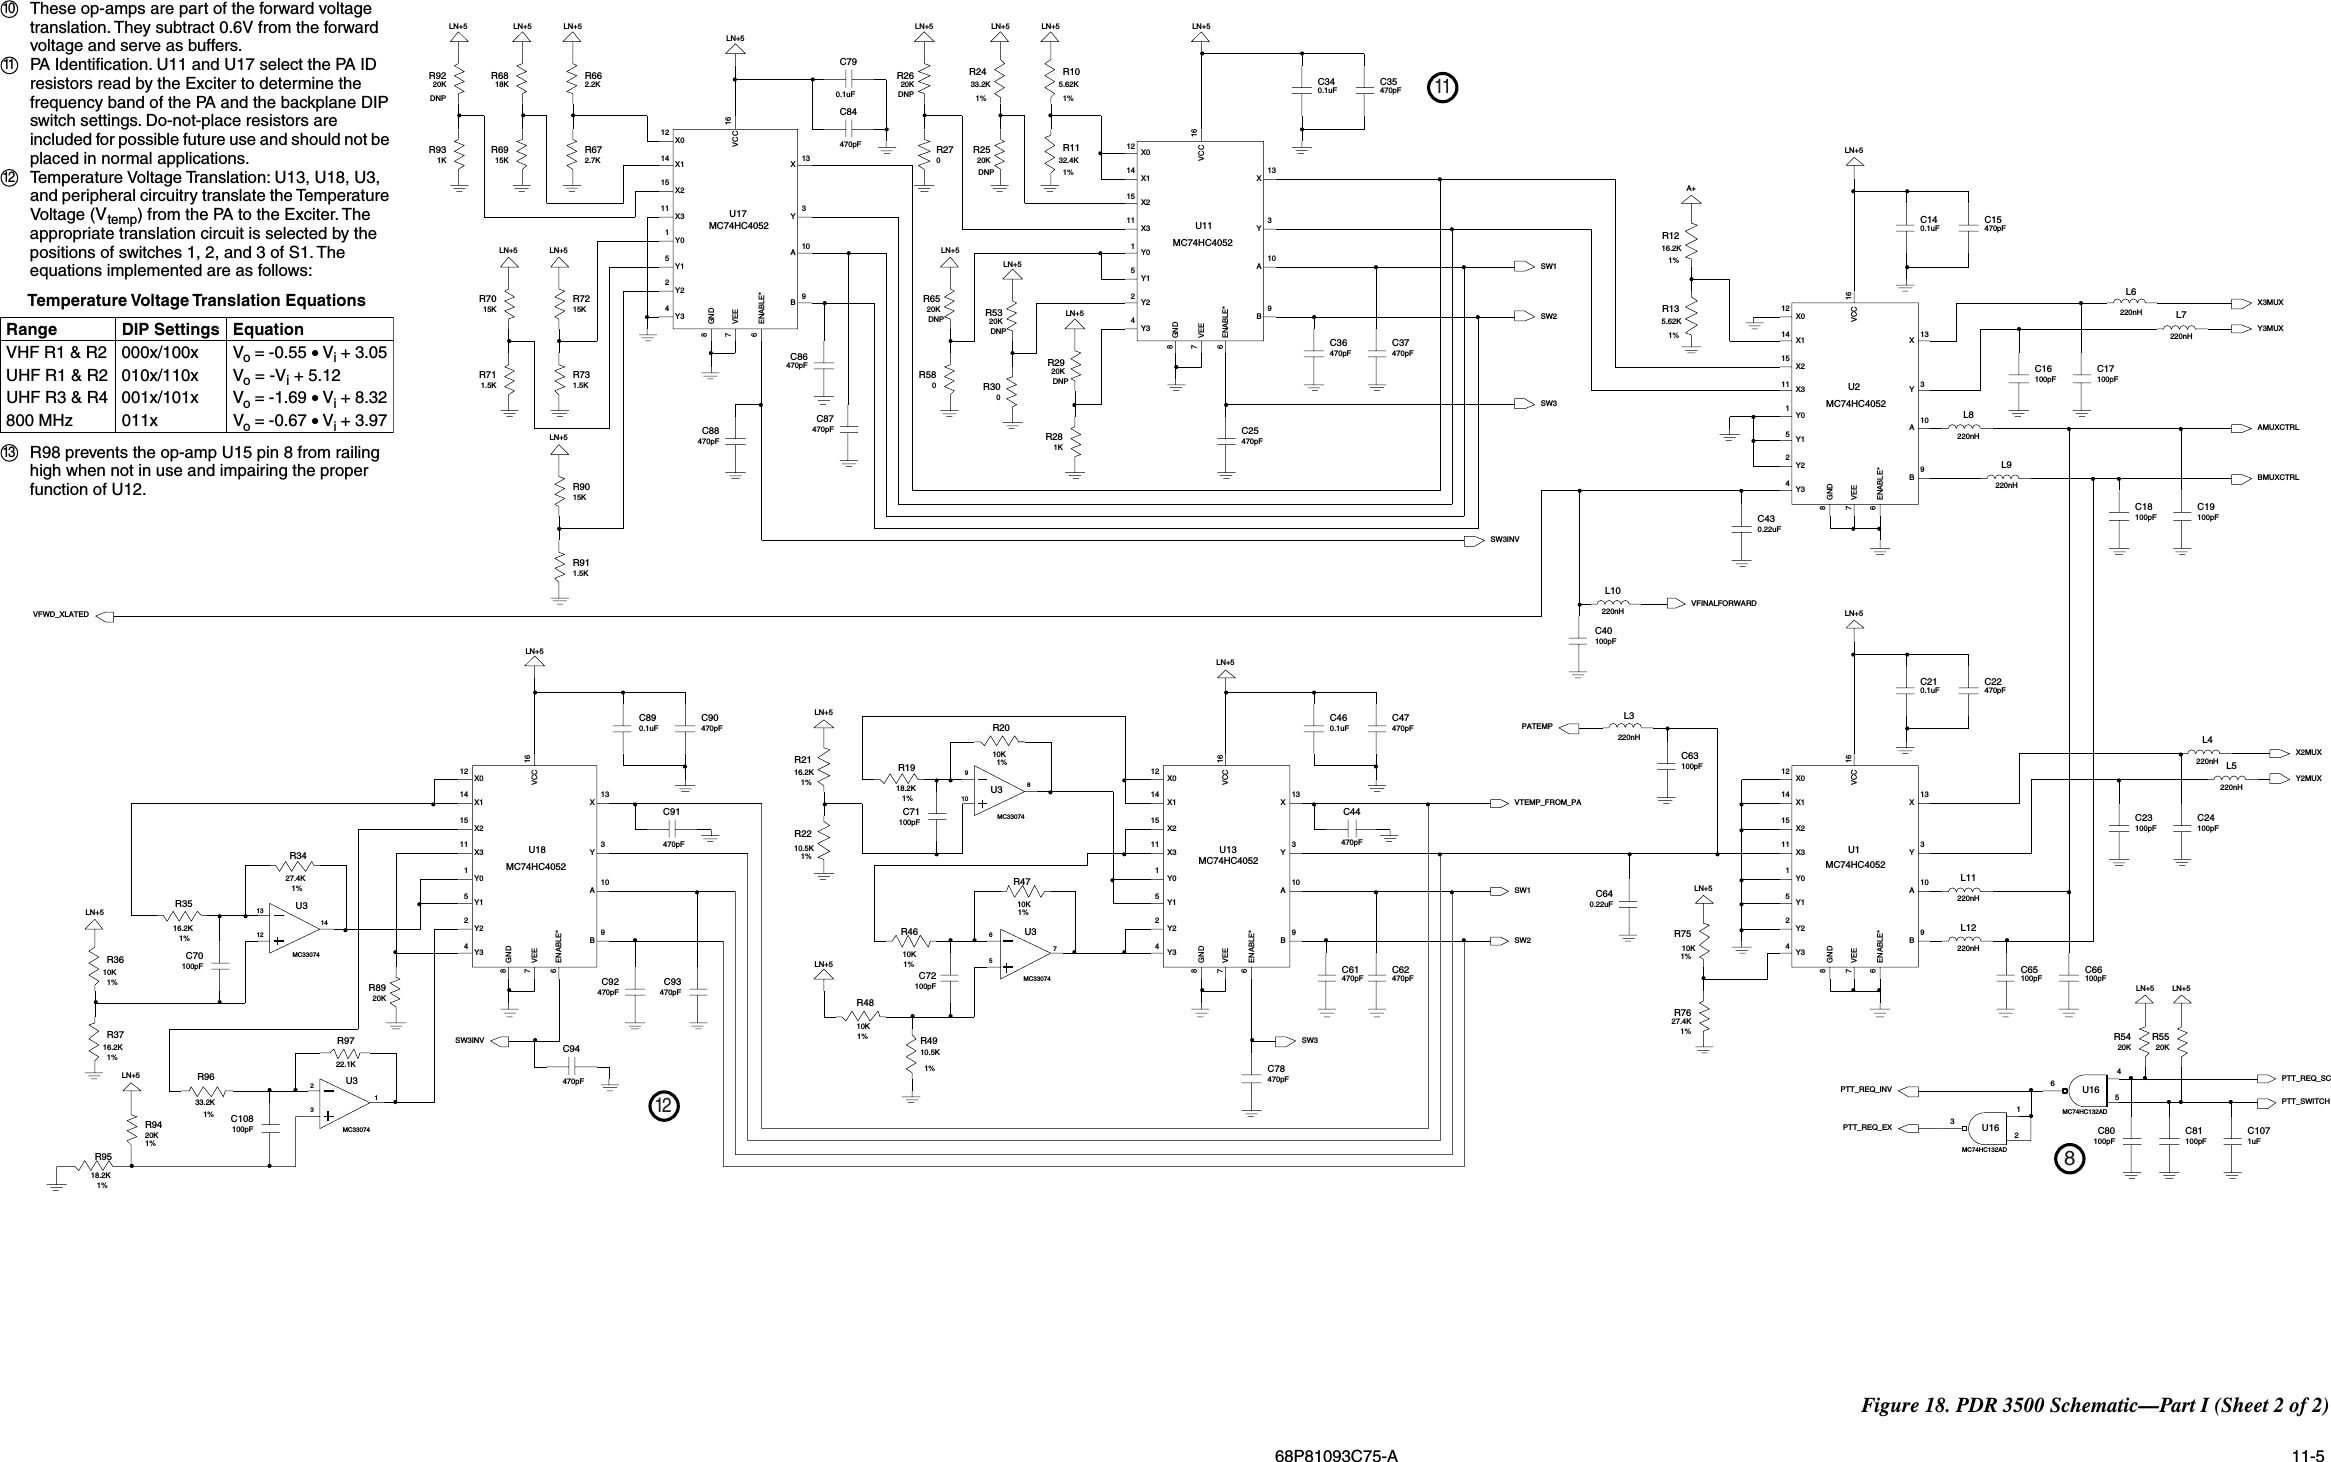  68P81093C75-A  11-5 Figure 18. PDR 3500 Schematic—Part I (Sheet 2 of 2)DNPDNPDNPDNPDNPDNPLN+51%10KR481%5.62KR1020KR89LN+5MC74HC132ADU16456C37470pF470pFLN+5LN+50.1uFC90X311 Y3Y01Y15Y22Y34C89ENABLE*6GND816VCCVEE7X13X012X114X2150U1MC74HC40528A10B9100pFR58C1920KR65R5320K20KR29R281KX311 Y3Y015Y1Y22Y346ENABLE*GND816VCC7VEEX13X012X114X215U1MC74HC40521A10B9C35C66470pF100pF 100pFC65L3C430.22uF220nH16.2KR371%LN+5LN+5C70100pF100pFC71100pFC721%R3427.4KC91470pF220nHL7220nHL6L5L4220nH100pF220nHLN+5C23C80100pF0.1uFC340R2720KR251%MC33074U3131214C640.22uF10KR471%R3610K18.2KR191%470pFC93C92470pF470pFC94220nHL11020KR30R26C62470pF470pFLN+5C61470pFC44470pFC36R2010K1%R2210.5K1%A+0.1uFC14C17100pF4Y312 X014 X115 X211 X3 3Y1Y05Y12Y210A9BENABLE*68GNDVCC 167VEE13XLN+5U2MC74HC4052X311 Y3Y01Y15Y22Y34ENABLE*6GND816VCCVEE7X13X012X114X215C18U1MC74HC4052A10B91%100pF10.5KR4916.2KR211%C47C46470pF3Y1Y05Y12Y24Y30.1uF8GNDVCC 167VEE13X12 X014 X115 X211 X3U1MC74HC4052310A9B6ENABLE*100pFC16MC33074U3657LN+5LN+5C790.1uF14 X115 X211 X3 3Y1Y0Y152Y24Y310A9BENABLE*68GNDVCC 16VEE713X12 X0100pFC24U1MC74HC40527C63100pF470pFC88MC33074U39108L10220nH1%1%R4610KR9015K33.2KR241uFC107C86470pF470pFC87470pFC22470pFC150.1uFC21R6915K470pFLN+5C84100pFC401%R7510KLN+5LN+5LN+5LN+5R9220KR931KR911.5KLN+5R76L12220nHC7827.4K1%LN+5470pF2.7KR67LN+52.2KR661%R3516.2KR135.62K1%LN+51%R1216.2KLN+5LN+5100pFC811%R1132.4KR54 R5520KU16MC74HC132AD12320KC10822.1KR97231100pFMC33074U3C25470pFR73R711.5KR721.5K15KR7015KLN+5220nHL9LN+5L8220nH18KR681%R9518.2KLN+5R941%20KPTT_SWITCH1%R9633.2KPTT_REQ_INVPATEMPVFINALFORWARDY2MUXX2MUXY3MUXX3MUXBMUXCTRLAMUXCTRLSW3SW2SW1SW3INVVTEMP_FROM_PASW3INVSW1SW2SW3PTT_REQ_SCPTT_REQ_EX12118VFWD_XLATEDThese op-amps are part of the forward voltage translation. They subtract 0.6V from the forward voltage and serve as buffers.PA Identiﬁcation. U11 and U17 select the PA ID resistors read by the Exciter to determine the frequency band of the PA and the backplane DIP switch settings. Do-not-place resistors are included for possible future use and should not be placed in normal applications.Temperature Voltage Translation: U13, U18, U3, and peripheral circuitry translate the Temperature Voltage (Vtemp) from the PA to the Exciter. The appropriate translation circuit is selected by the positions of switches 1, 2, and 3 of S1. The equations implemented are as follows:R98 prevents the op-amp U15 pin 8 from railing high when not in use and impairing the proper function of U12.Temperature Voltage Translation EquationsRange DIP Settings EquationVHF R1 &amp; R2 000x/100x Vo = -0.55 • Vi + 3.05UHF R1 &amp; R2 010x/110x Vo = -Vi + 5.12UHF R3 &amp; R4 001x/101x Vo = -1.69 • Vi + 8.32800 MHz 011x Vo = -0.67 • Vi + 3.9710111213